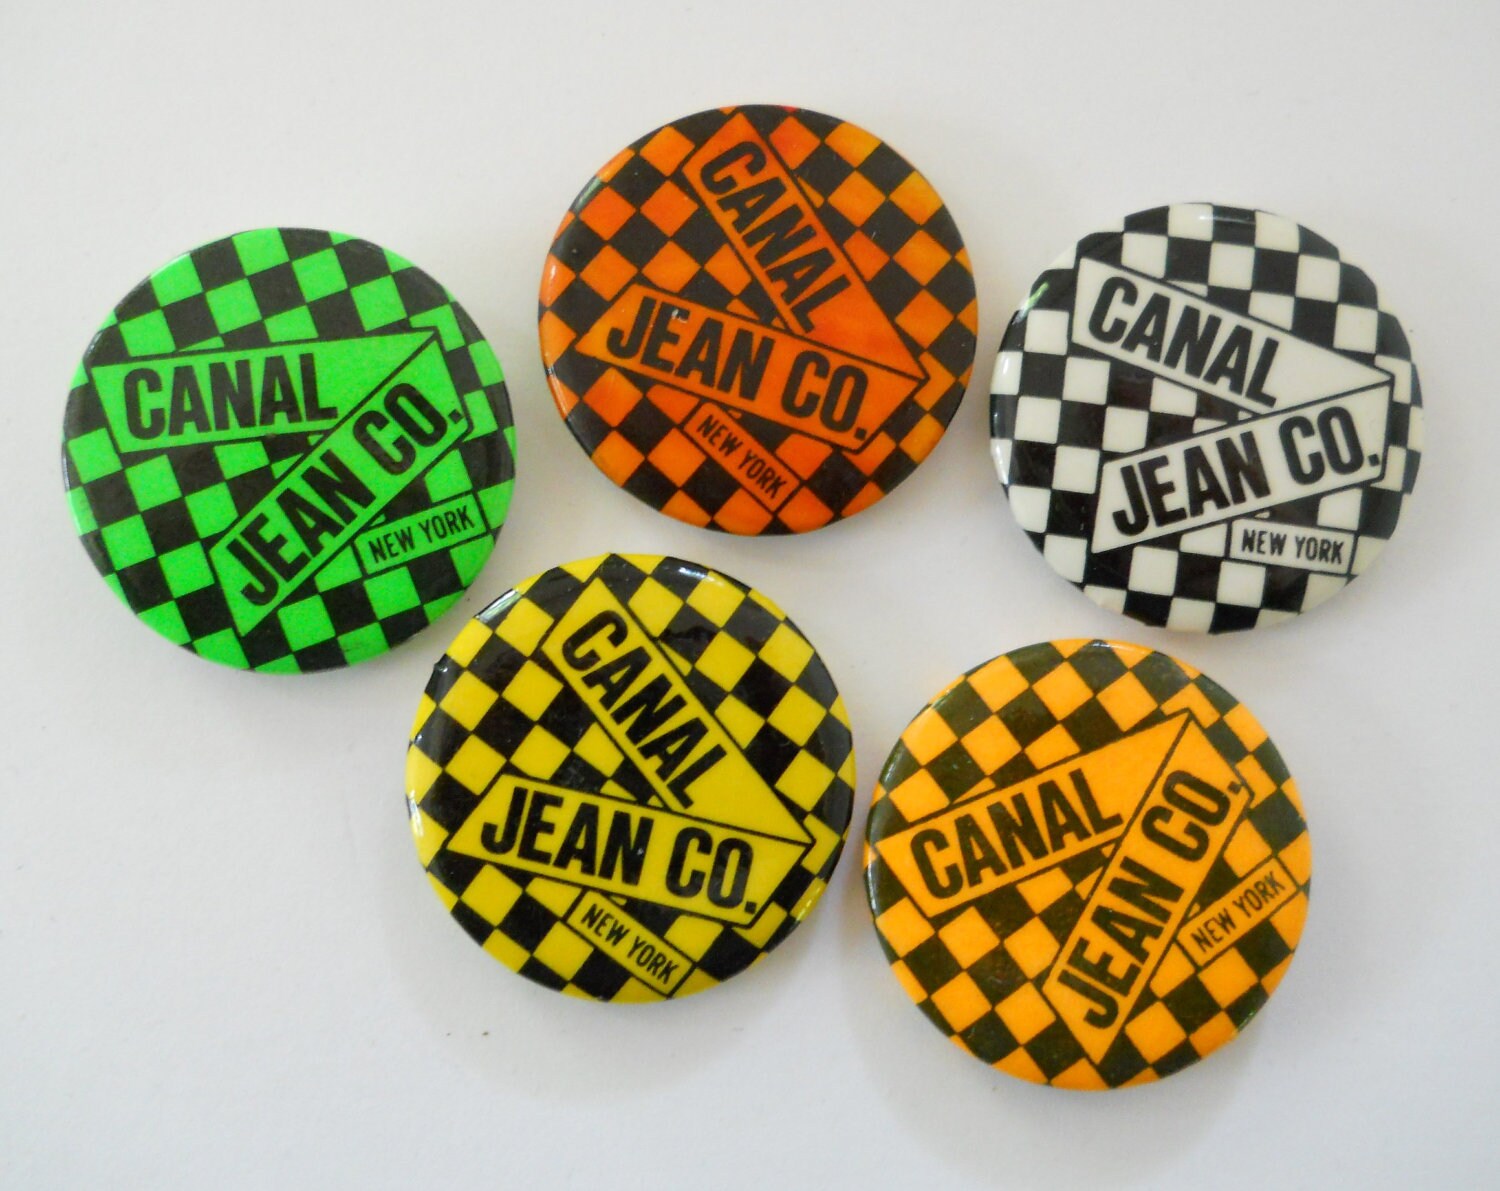 Canal Jeans NYC Promotional Pins